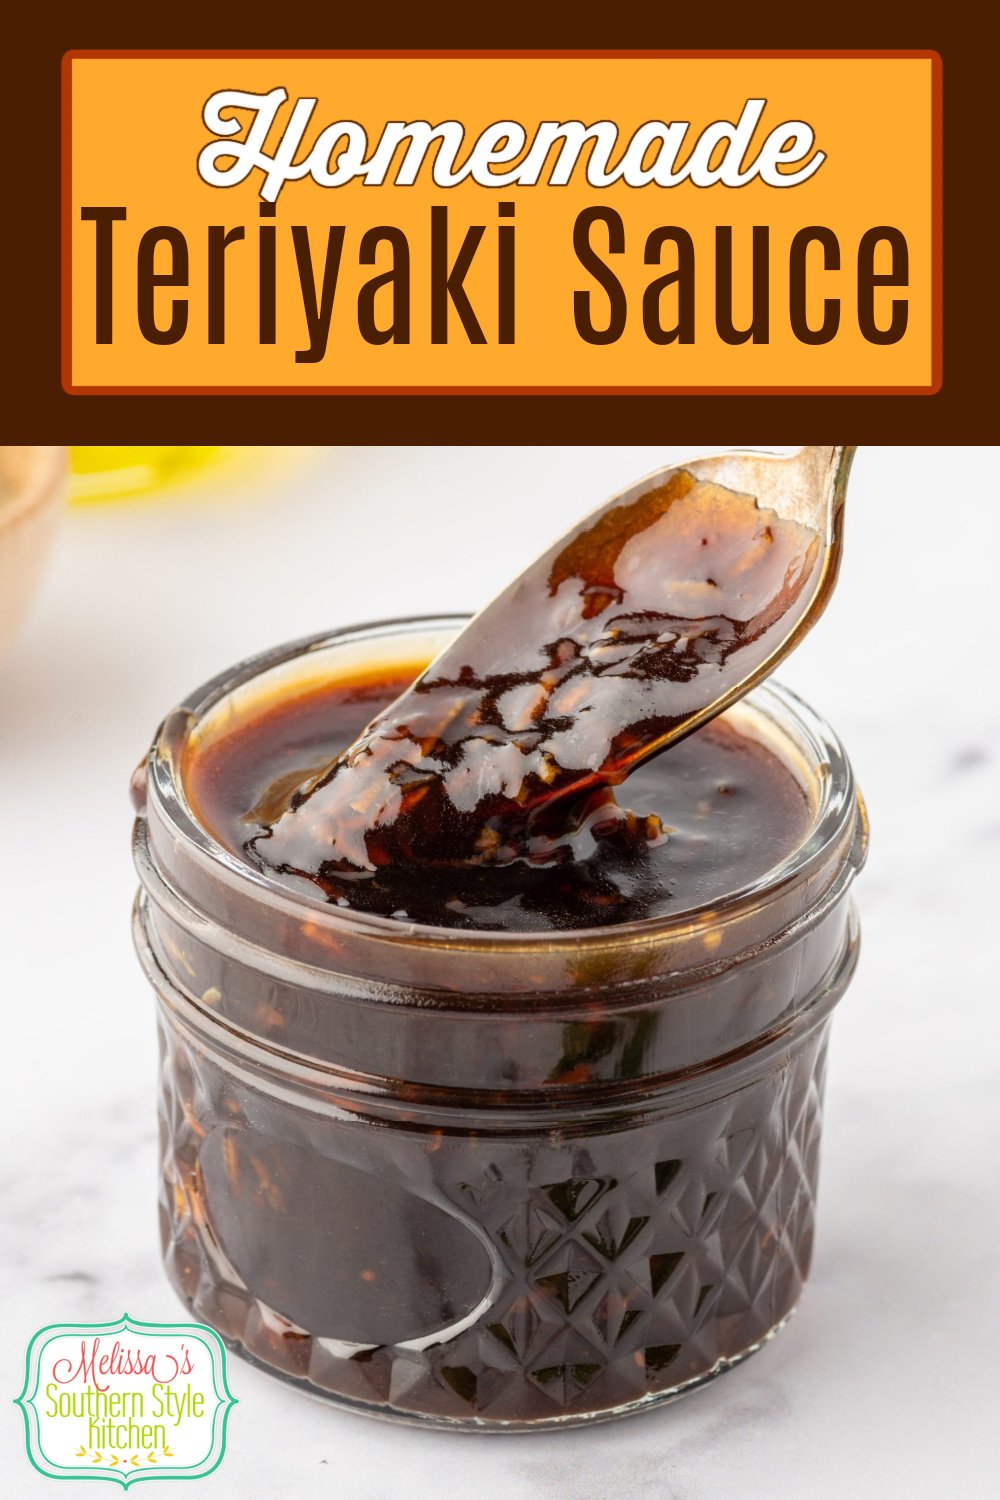 This Homemade Teriyaki Sauce recipe is full flavored. Use it as a glaze for grilling or to enhance your favorite Asian inspired dishes. #teriyakisauce #easysaucerecipes #teriyaki #Asianrecipes #teriyakiglaze via @melissasssk